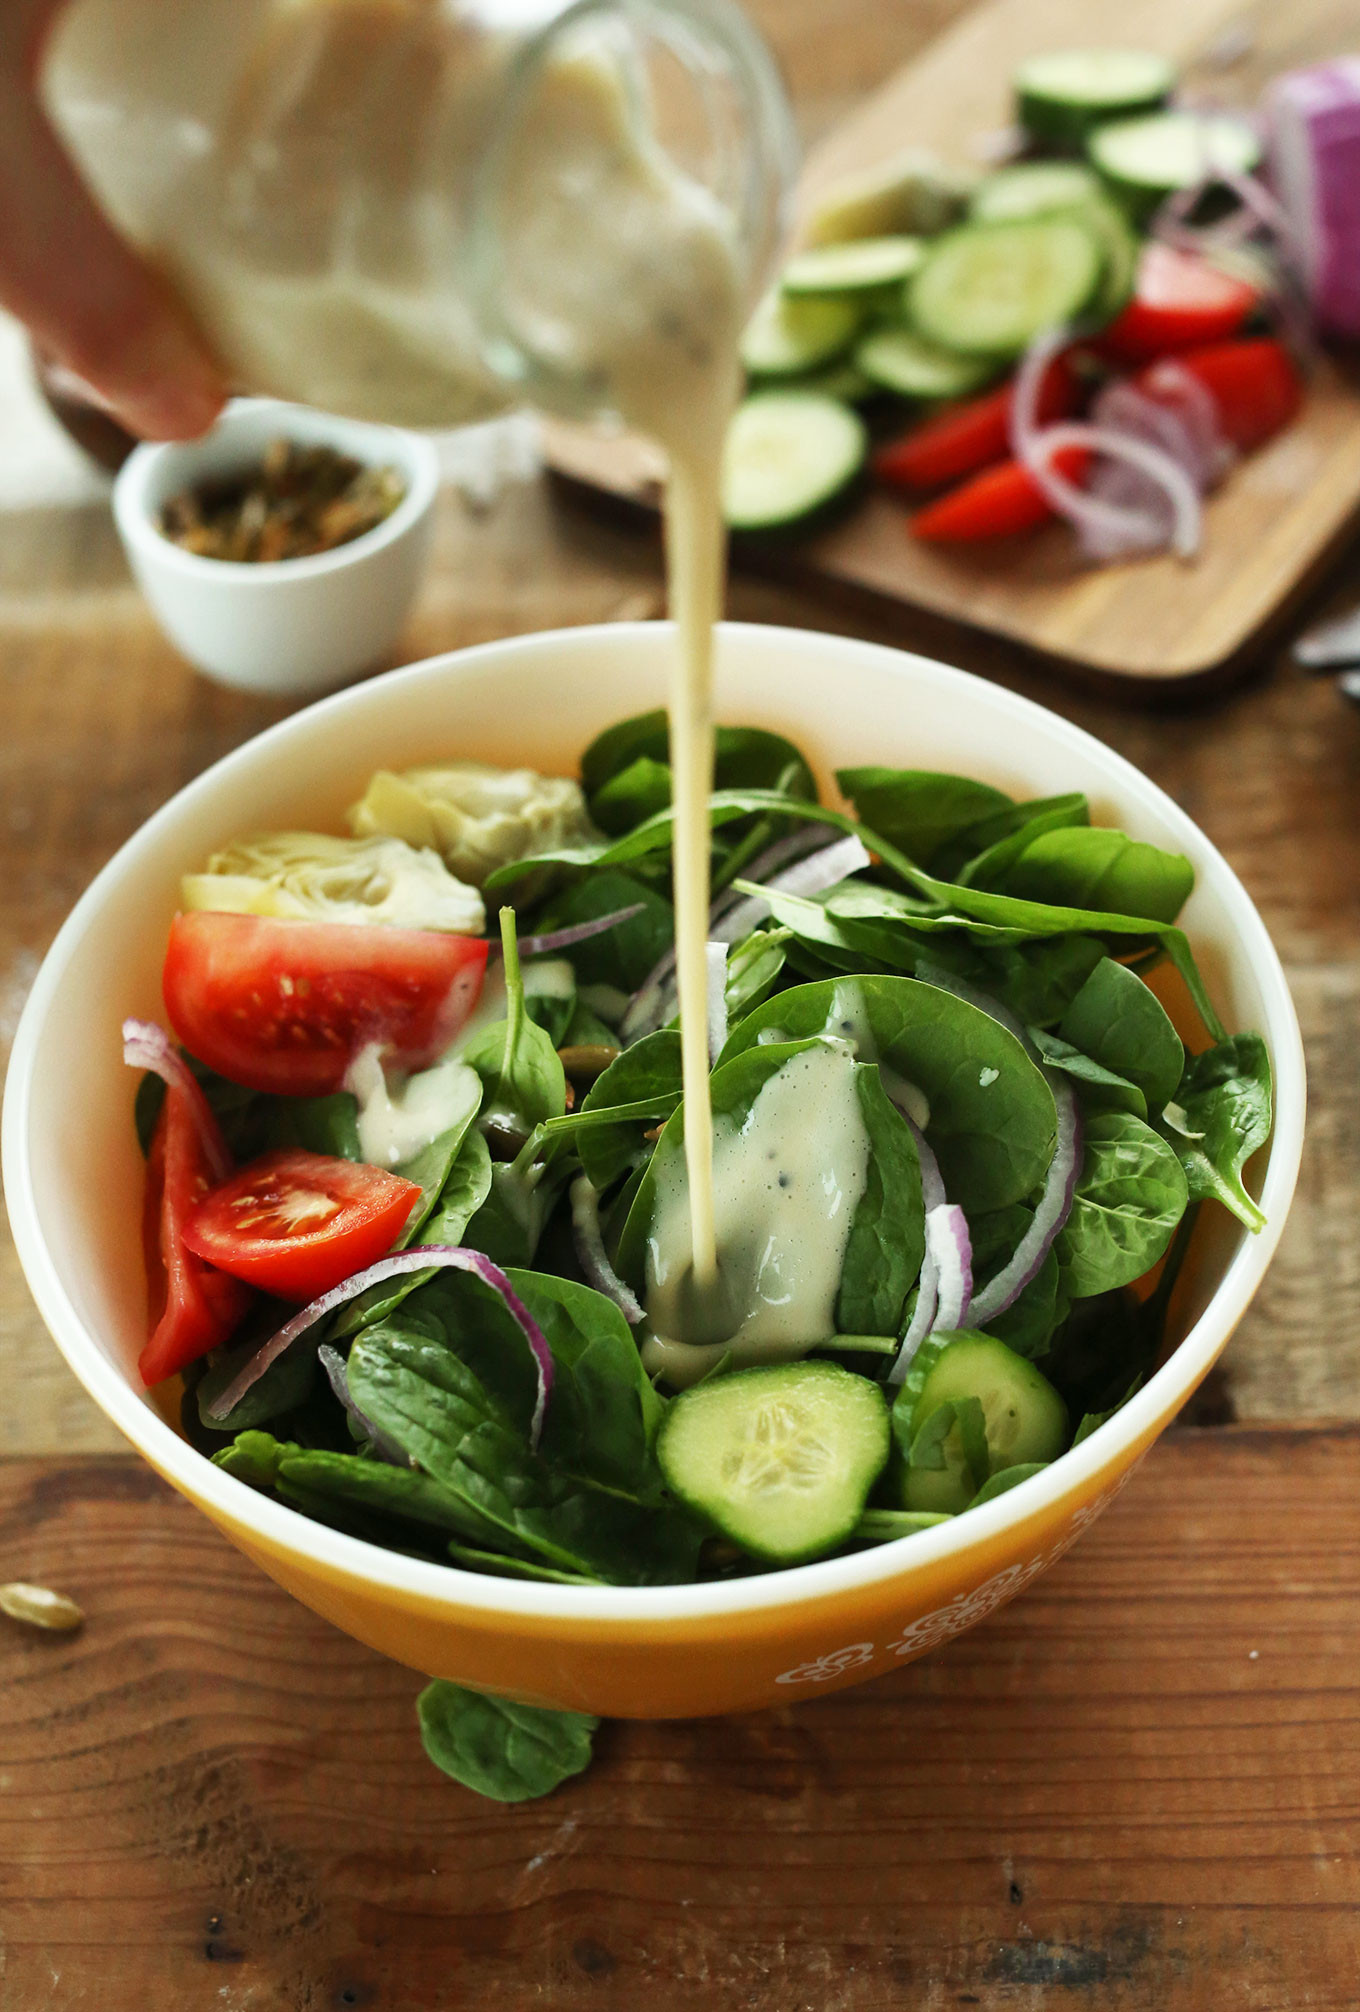 Spinach Salad Dressings Recipes
 Creamy Spinach Salad